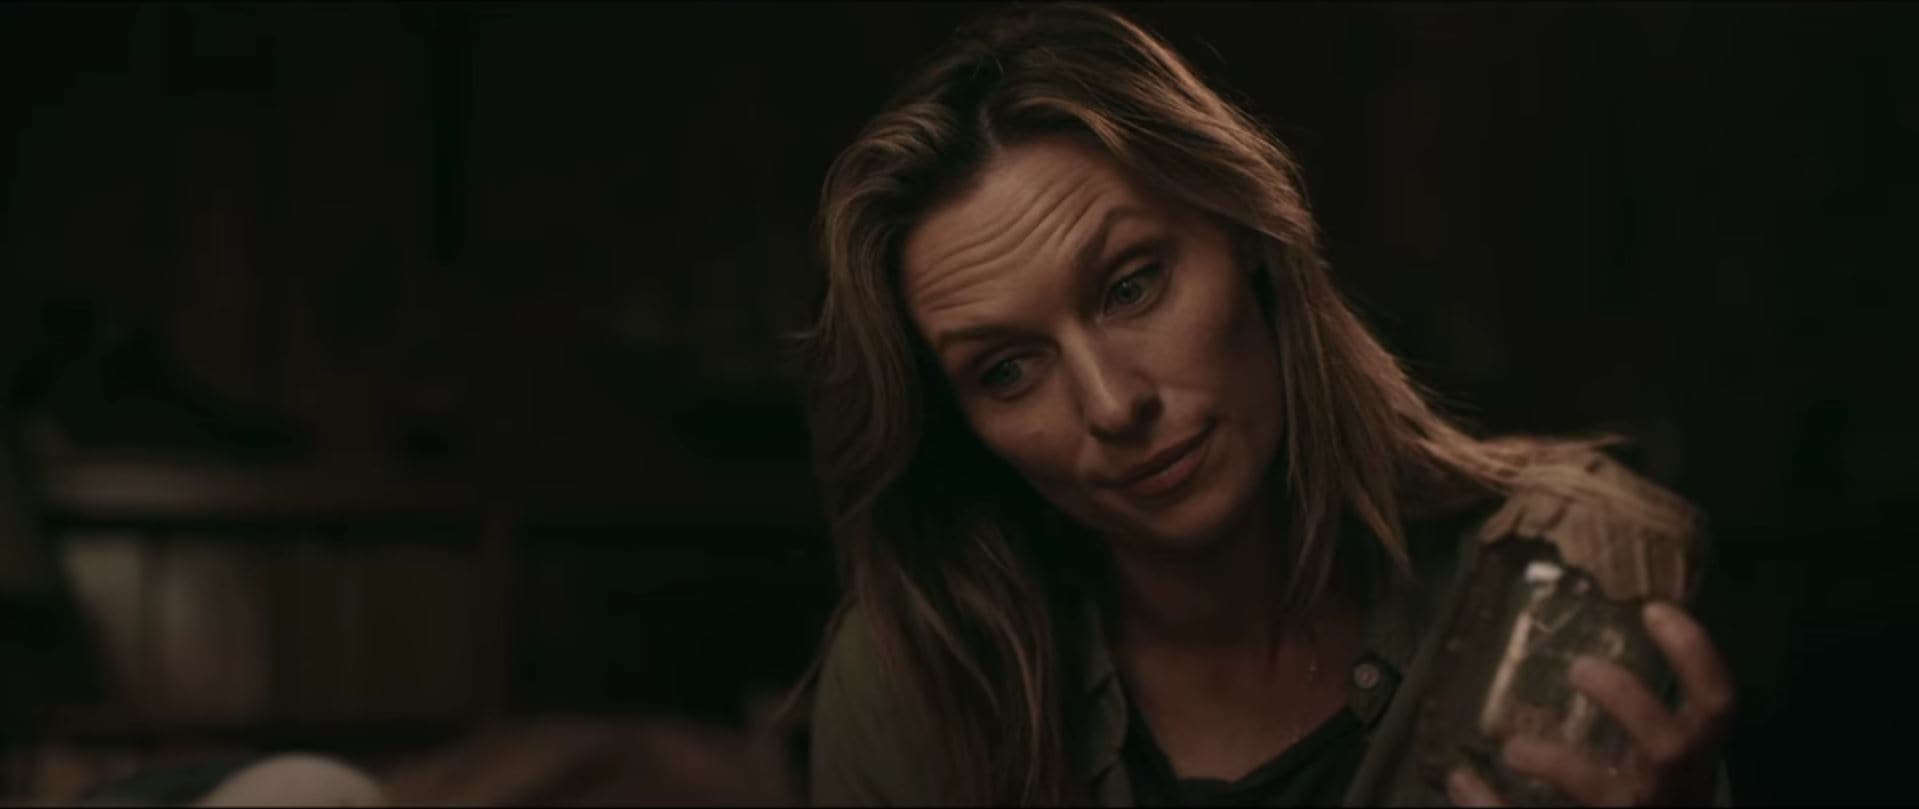 Michaela McManus as Audry from The Block Island Sound (2021)